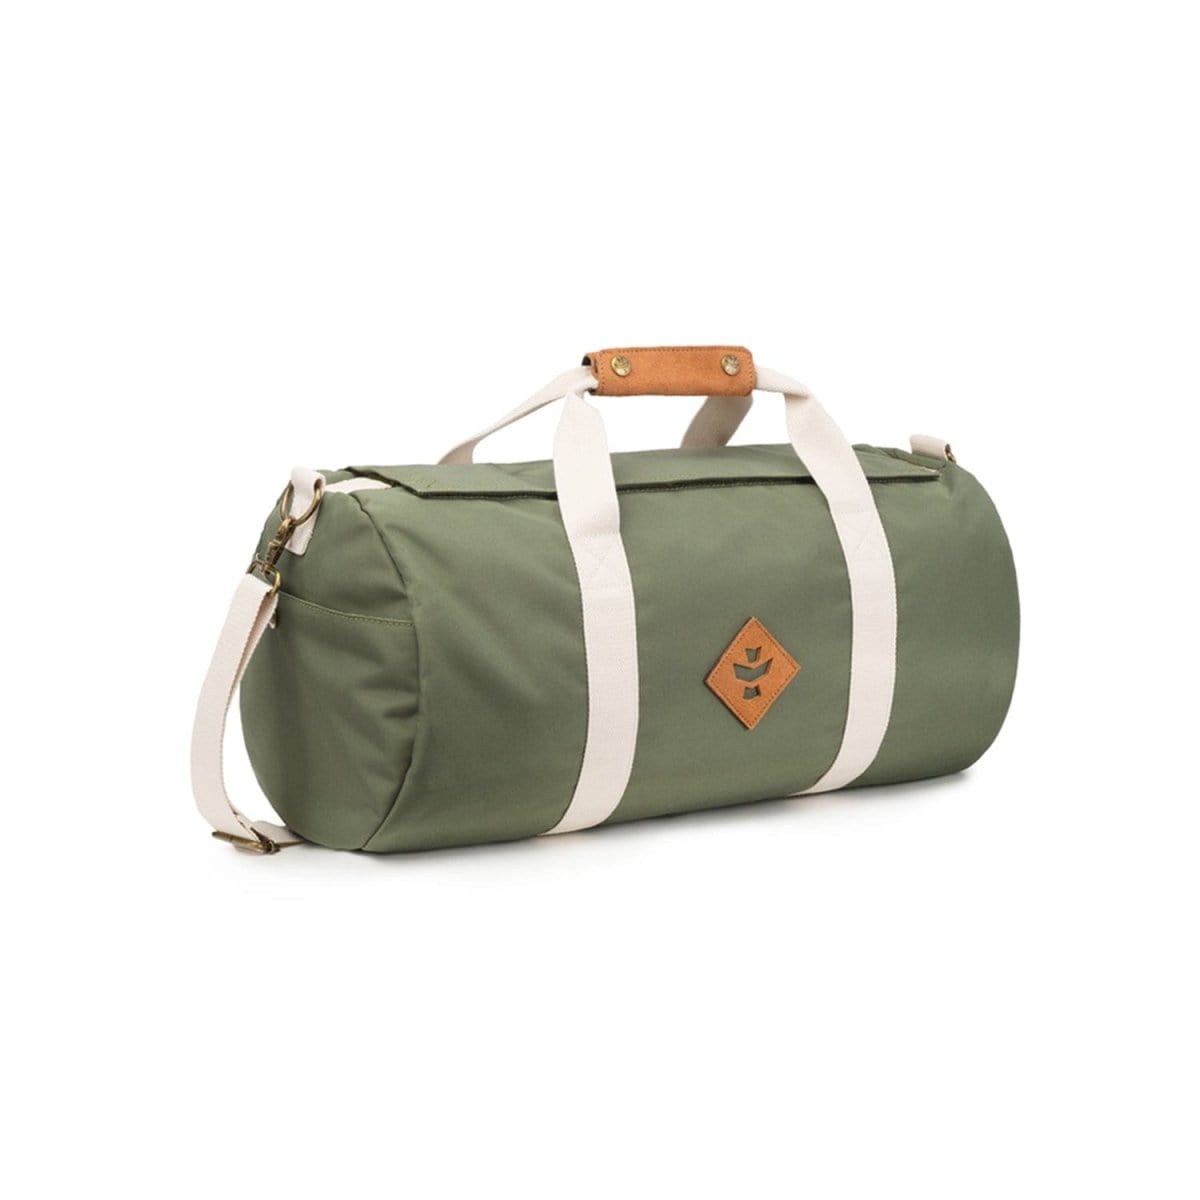 Revelry Supply Travel Bag Green The Overnighter - Smell Proof Small Duffle